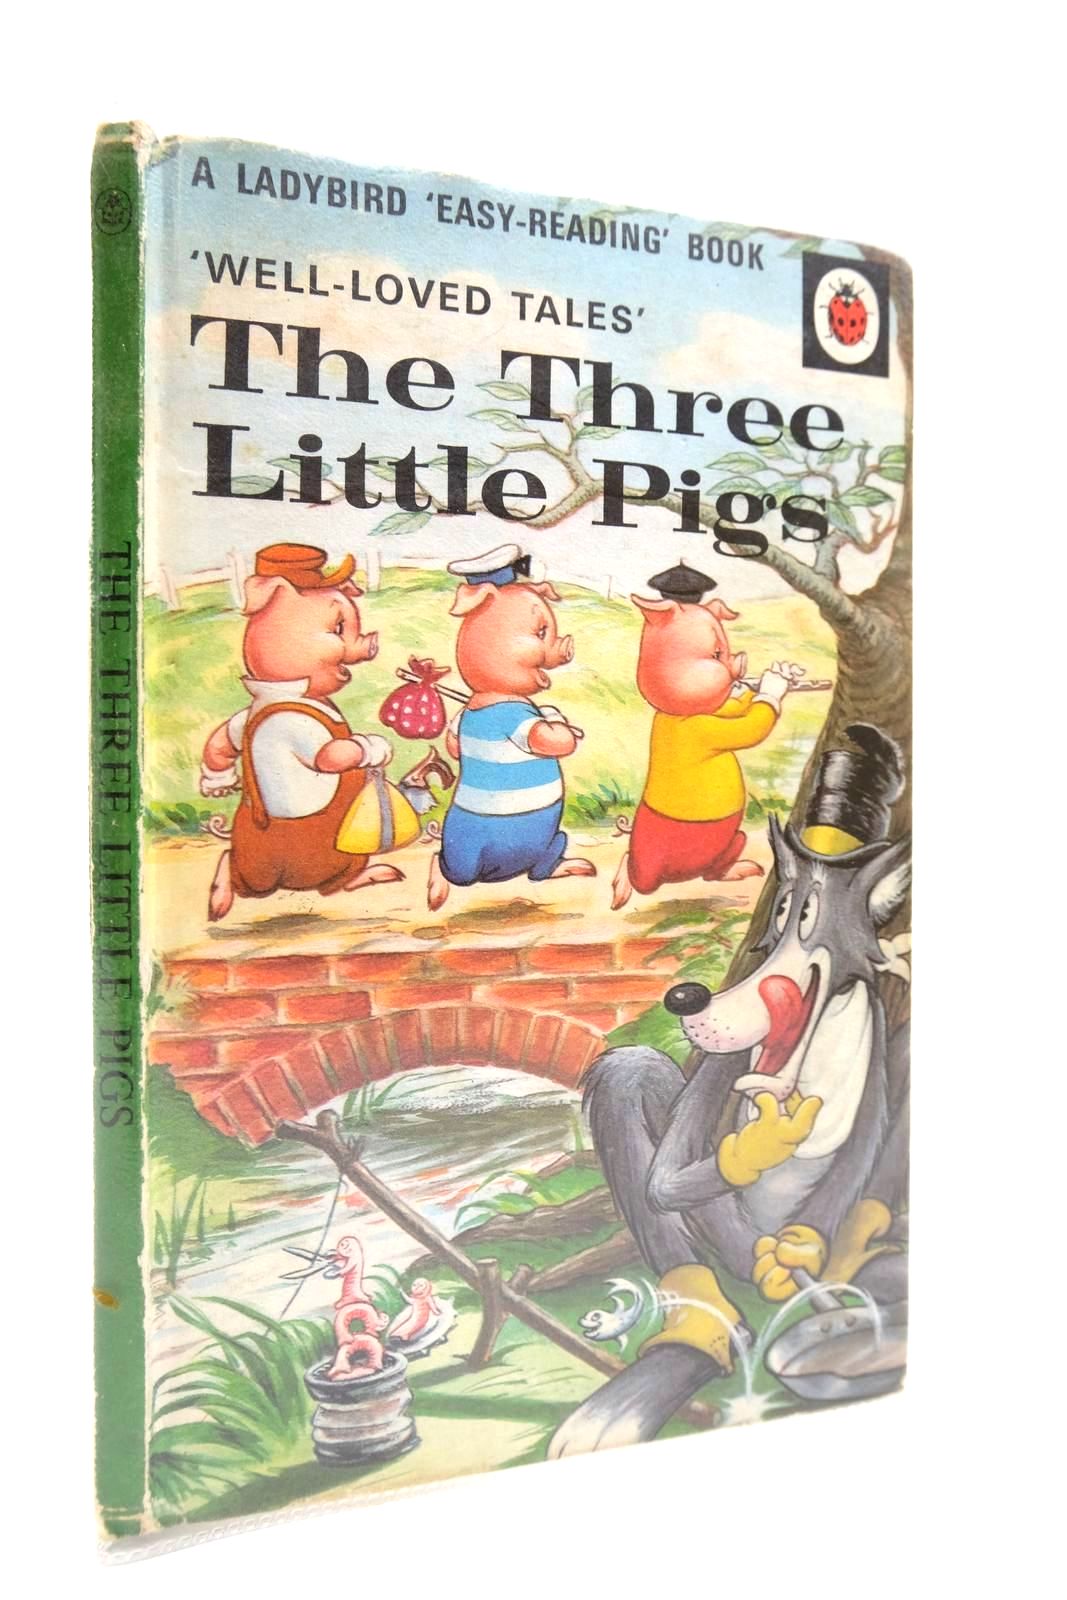 Photo of THE THREE LITTLE PIGS written by Southgate, Vera illustrated by Lumley, Robert published by Wills & Hepworth Ltd. (STOCK CODE: 2140875)  for sale by Stella & Rose's Books